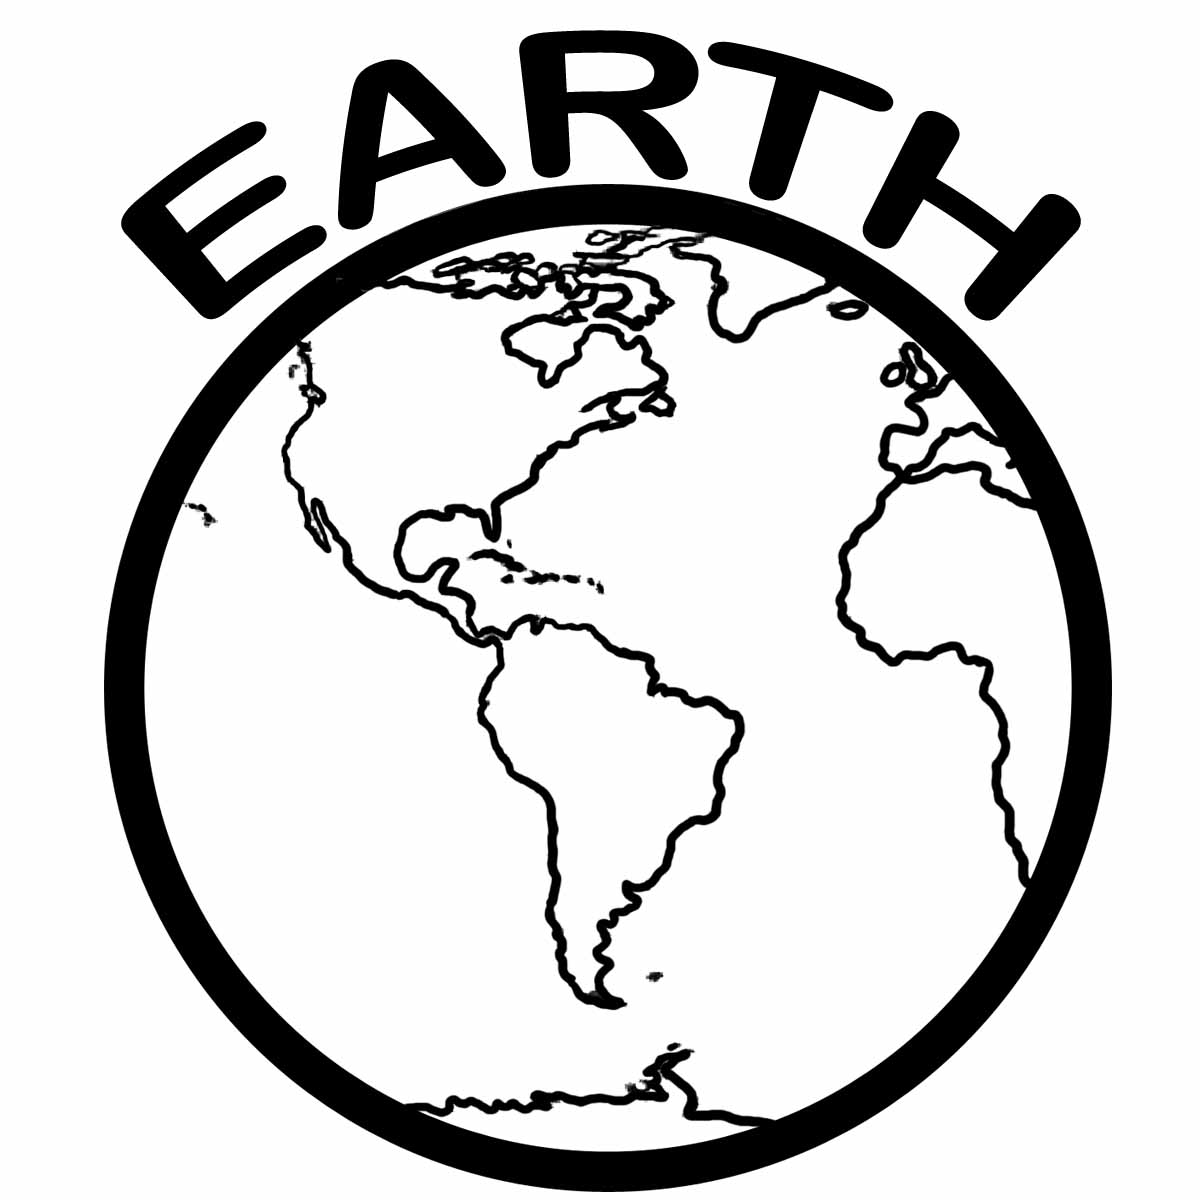 Earth science teacher clipart free images 2